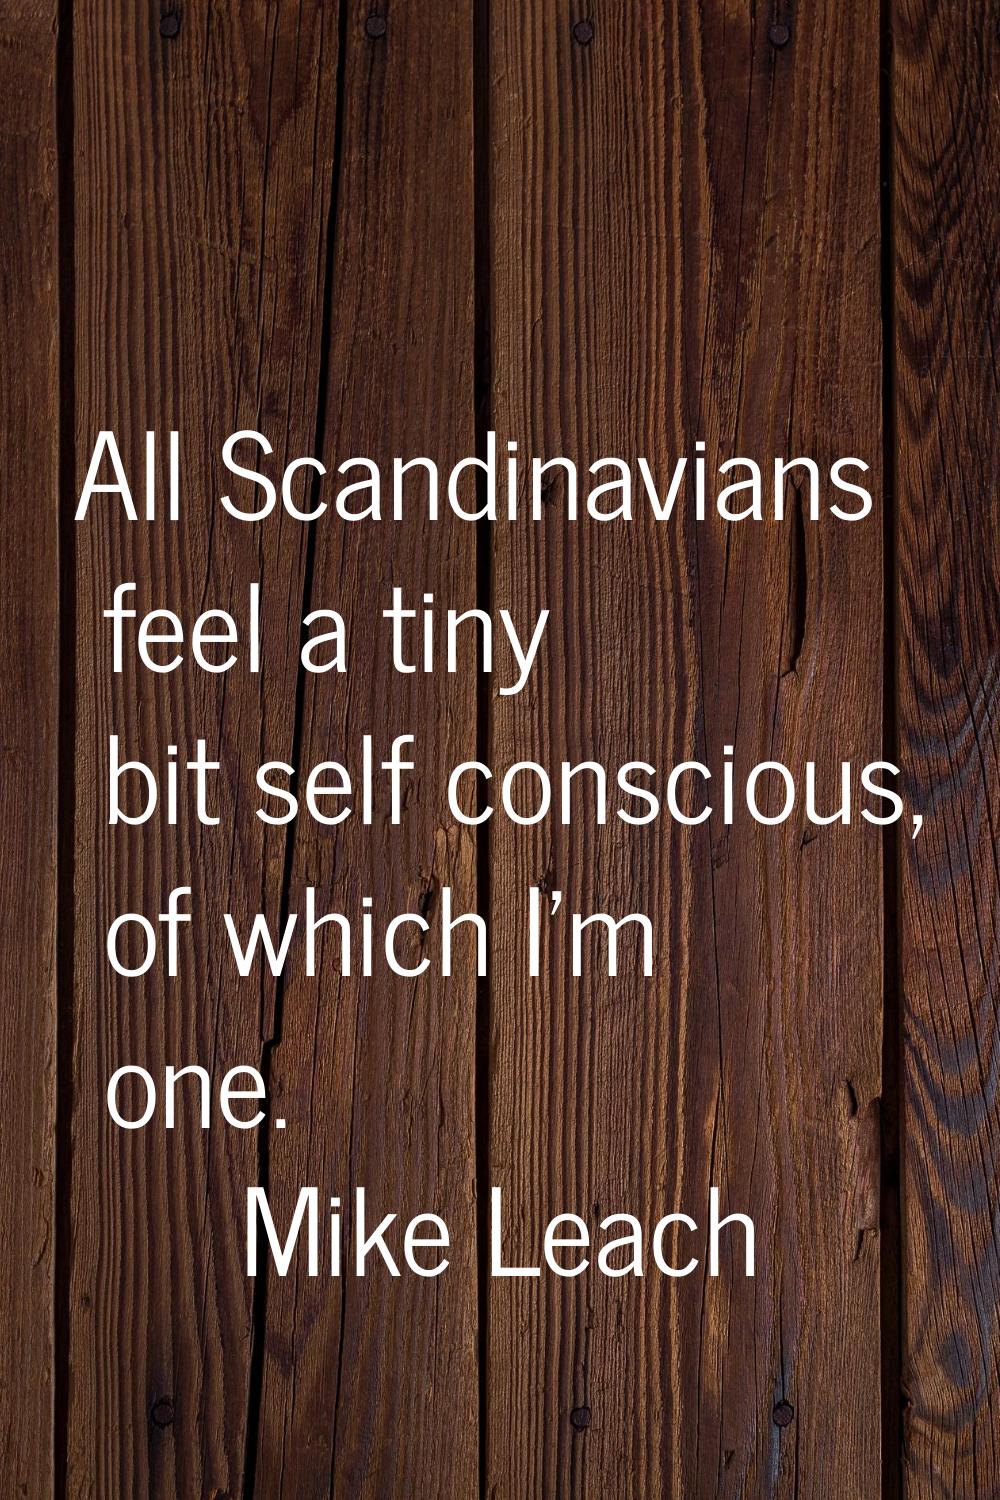 All Scandinavians feel a tiny bit self conscious, of which I'm one.